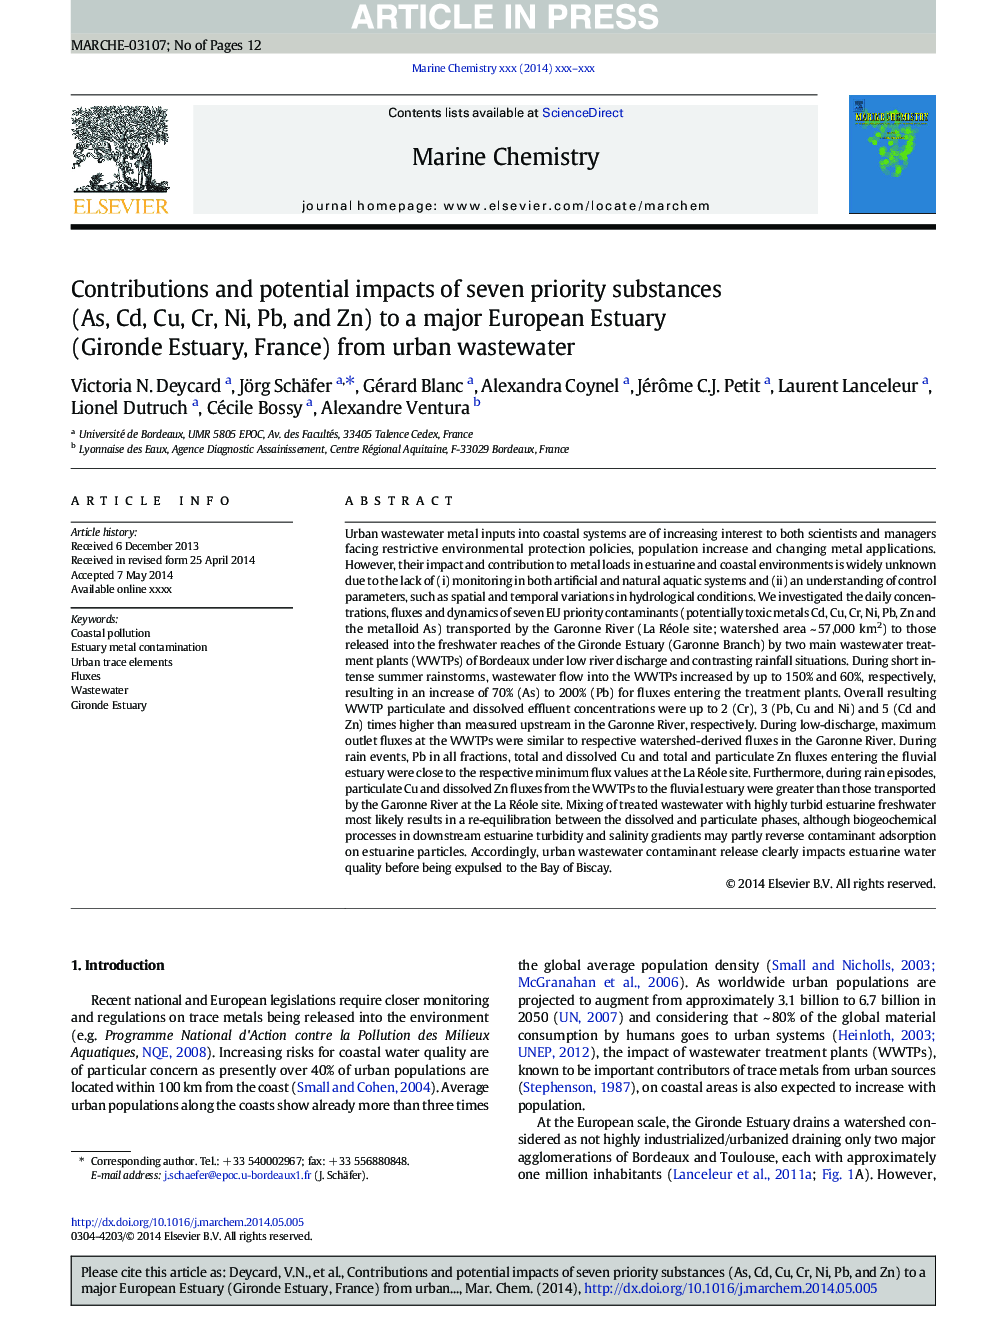 Contributions and potential impacts of seven priority substances (As, Cd, Cu, Cr, Ni, Pb, and Zn) to a major European Estuary (Gironde Estuary, France) from urban wastewater